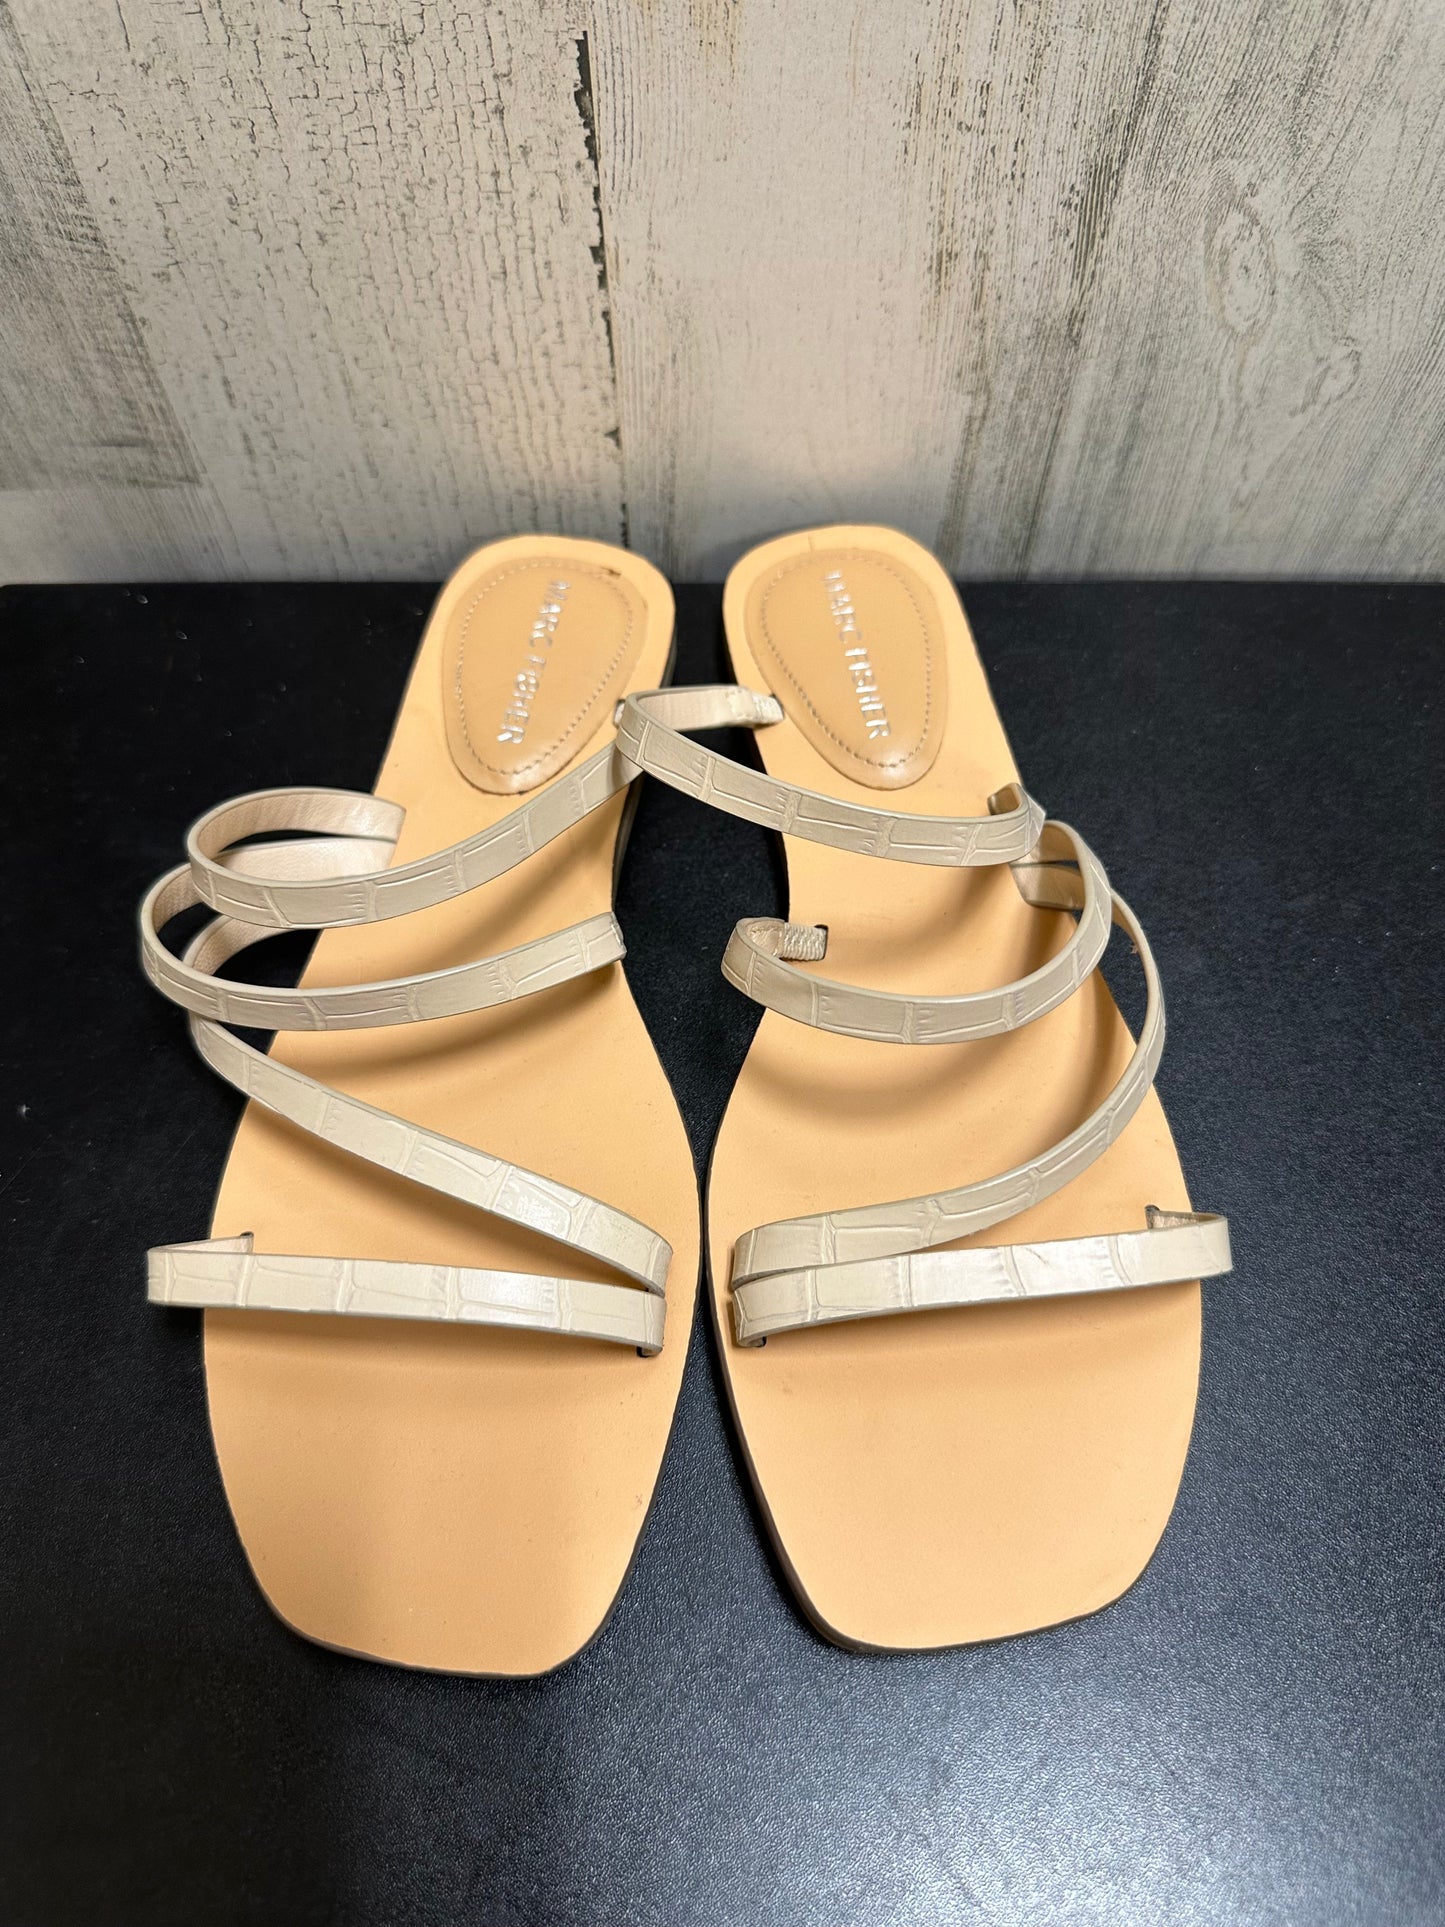 Cream Sandals Flats Marc Fisher, Size 8